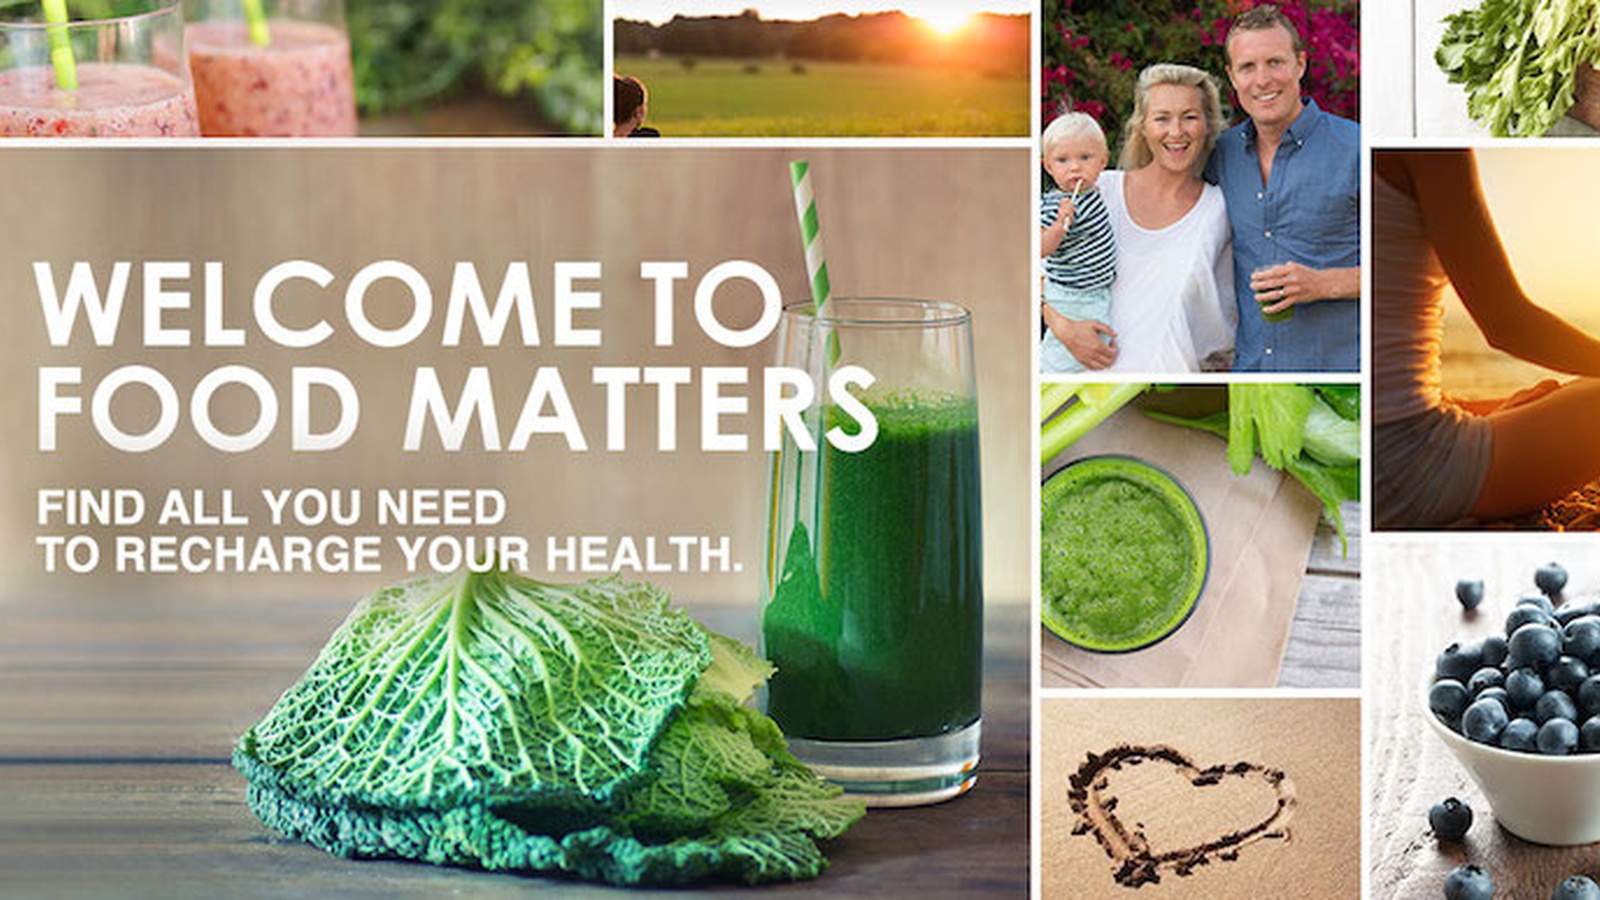 Have You Seen The NEW Food Matters Website?